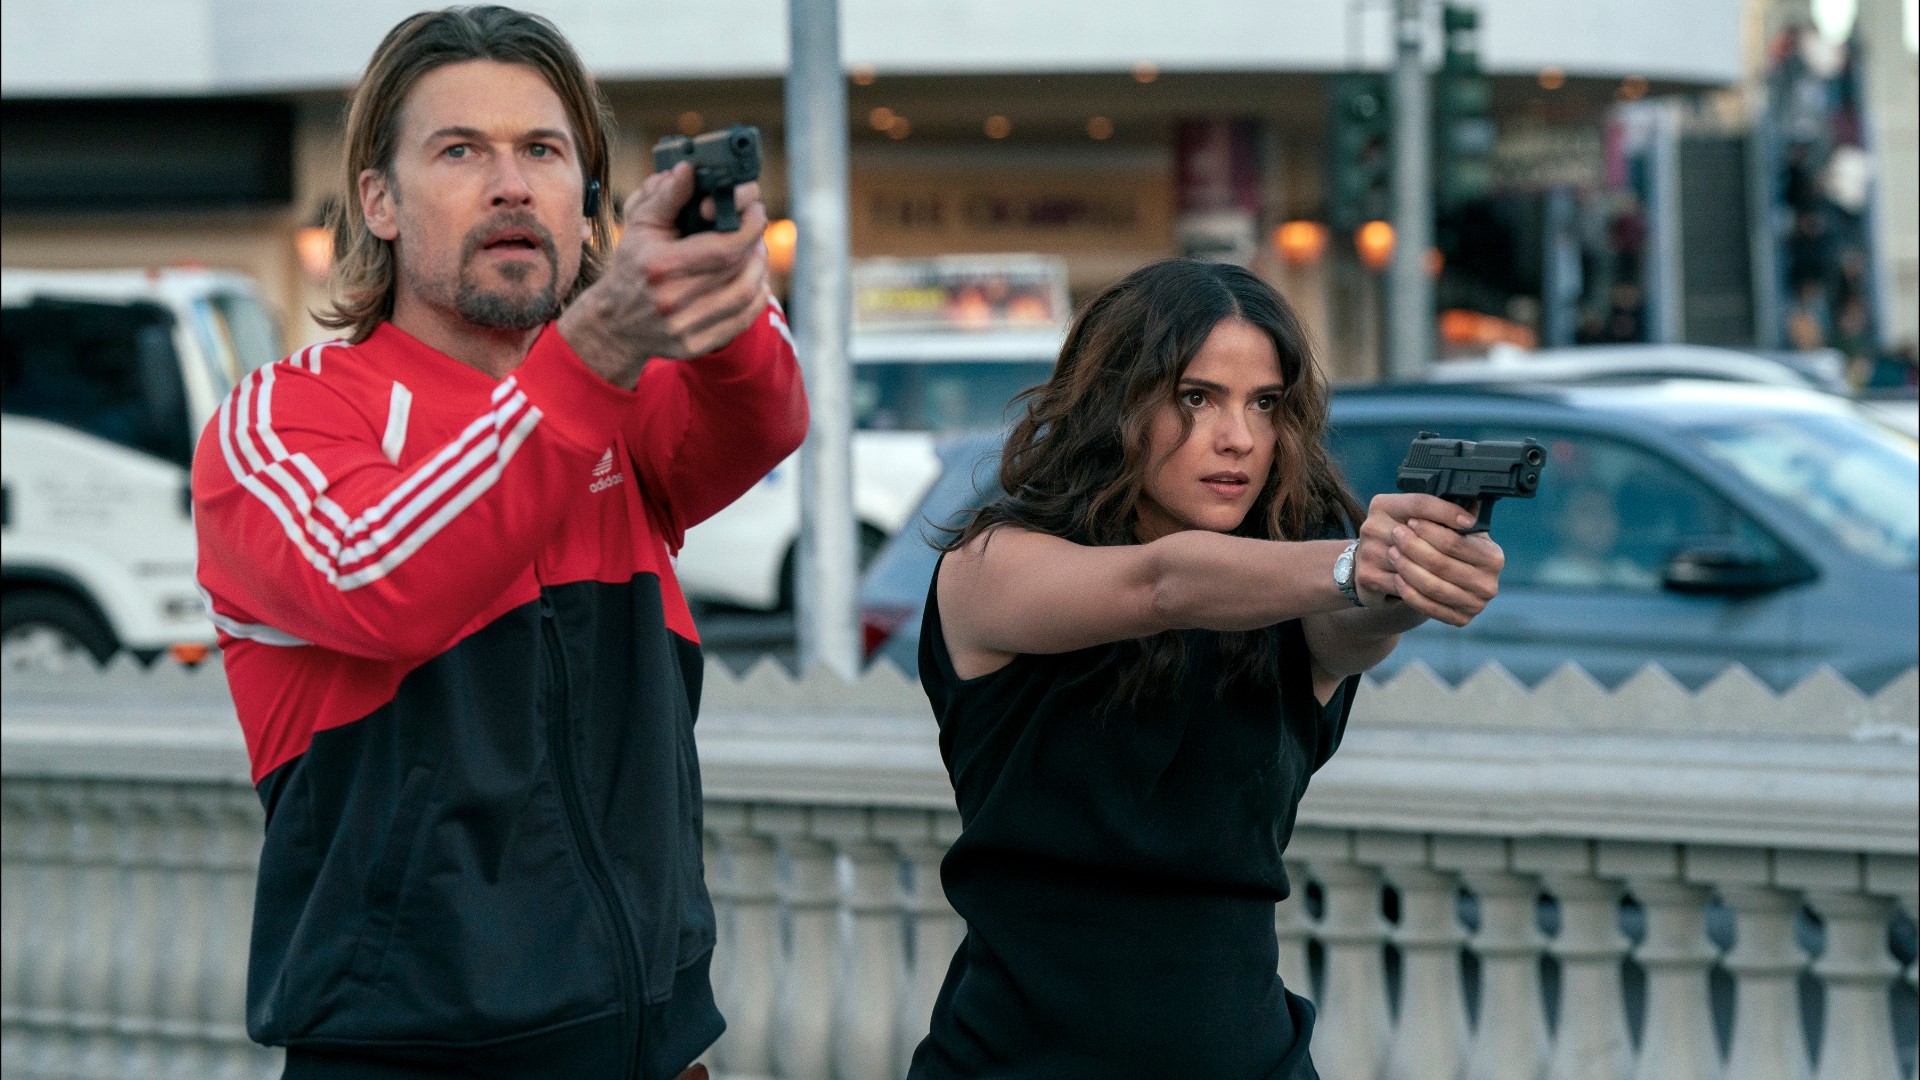 All eight episodes of "Obliterated," starring Nick Zano and Shelley Hennig, are now streaming on Netflix.